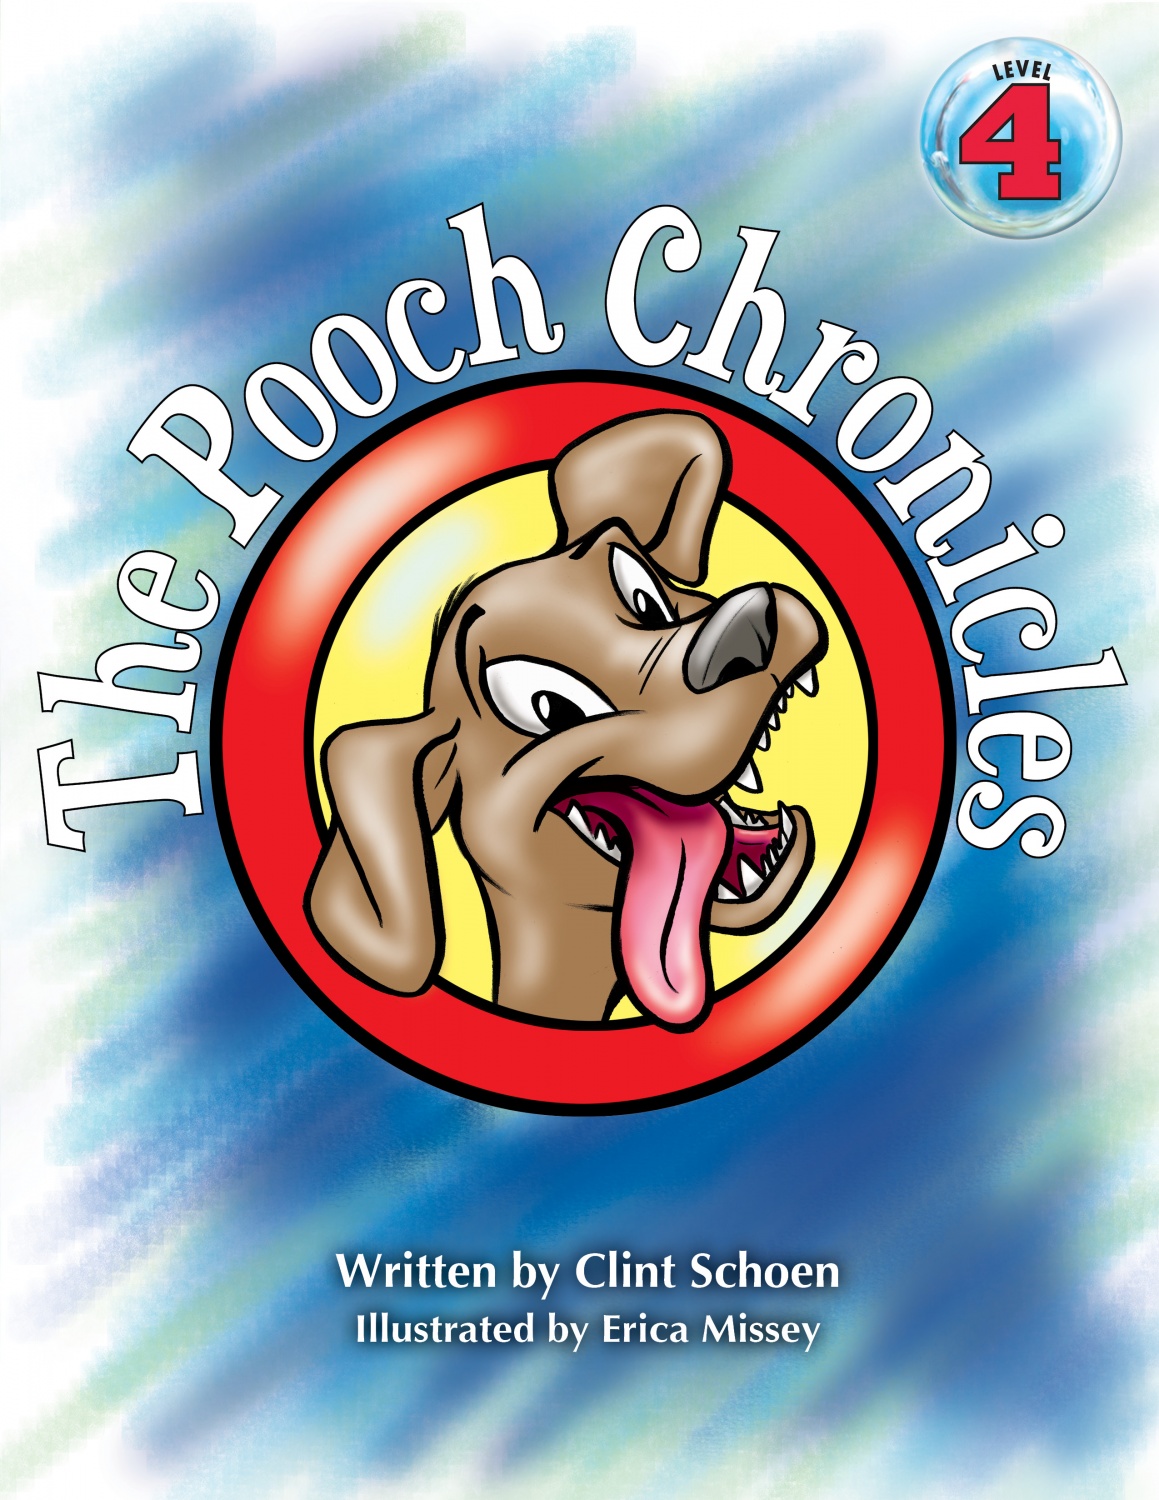 pooch chronicles front cover 1